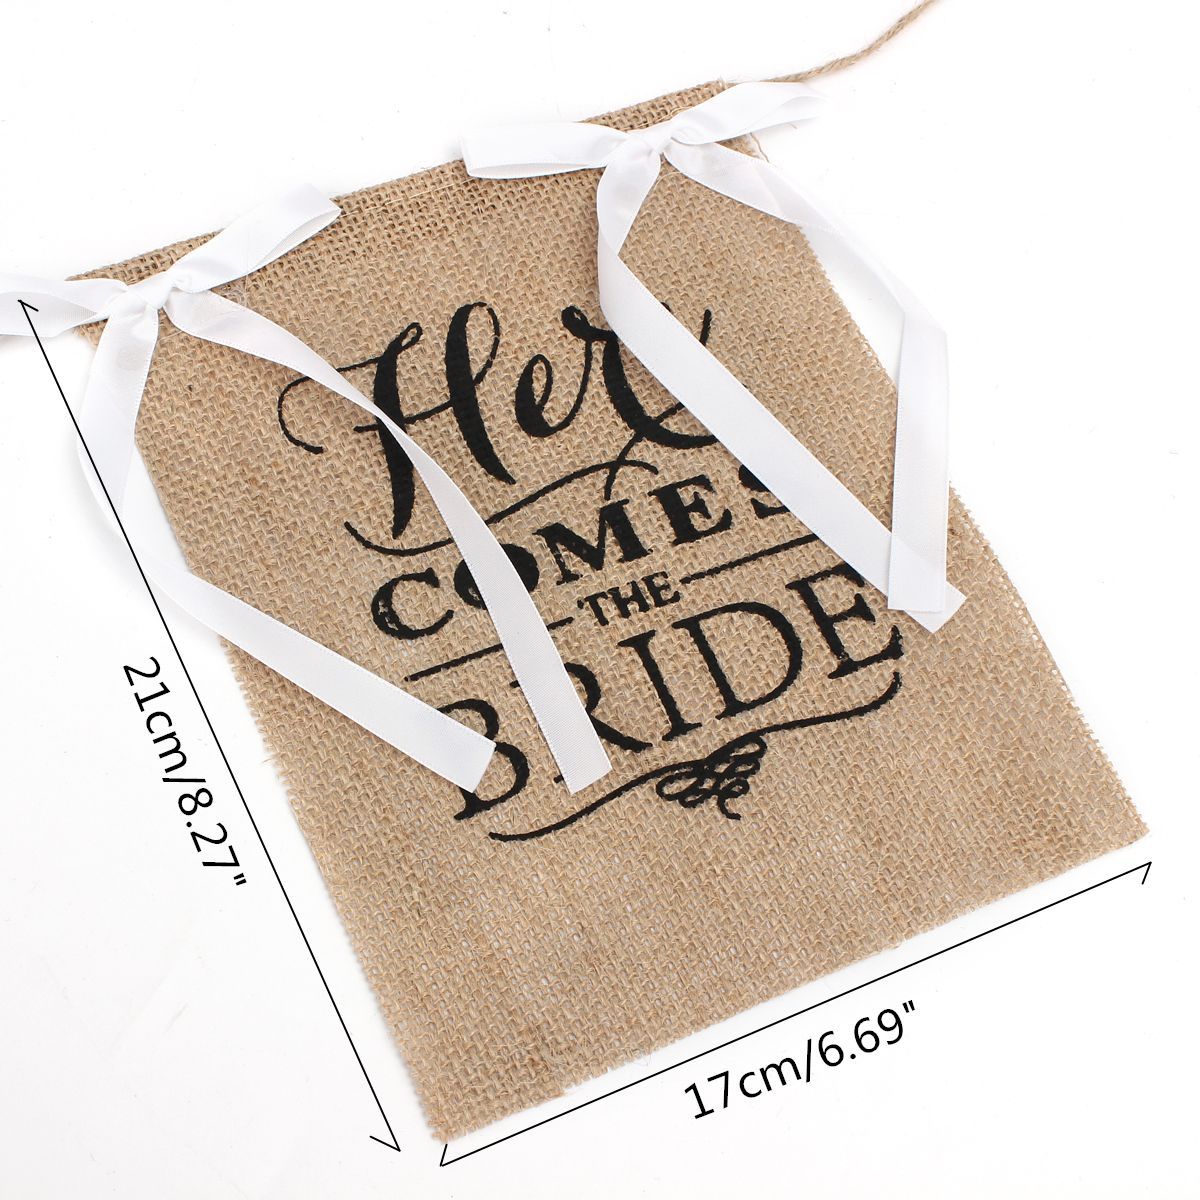 Here-Comes-the-Bride-Wedding-Banner-Party-Burlap-Bunting-Garland-Photo-Booth-Decorations-1405994